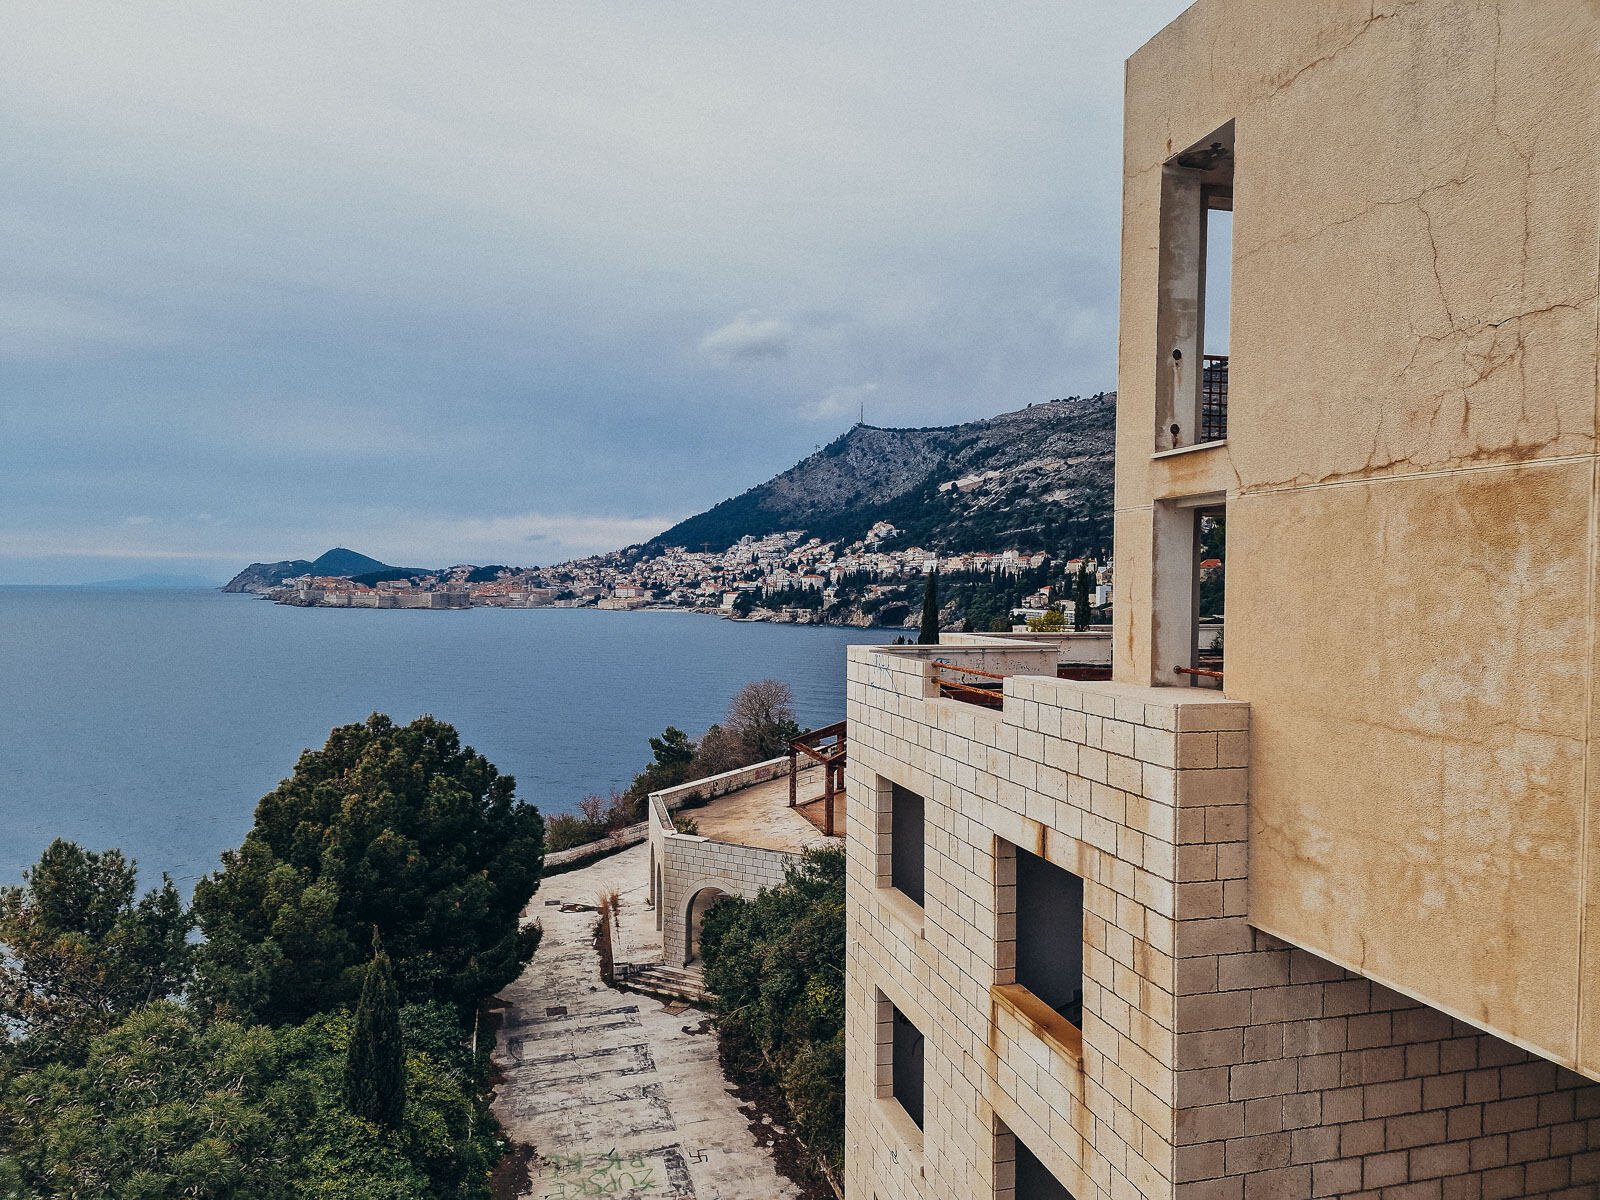 abandoned hotel building overlooking the bay of Dubrovnik